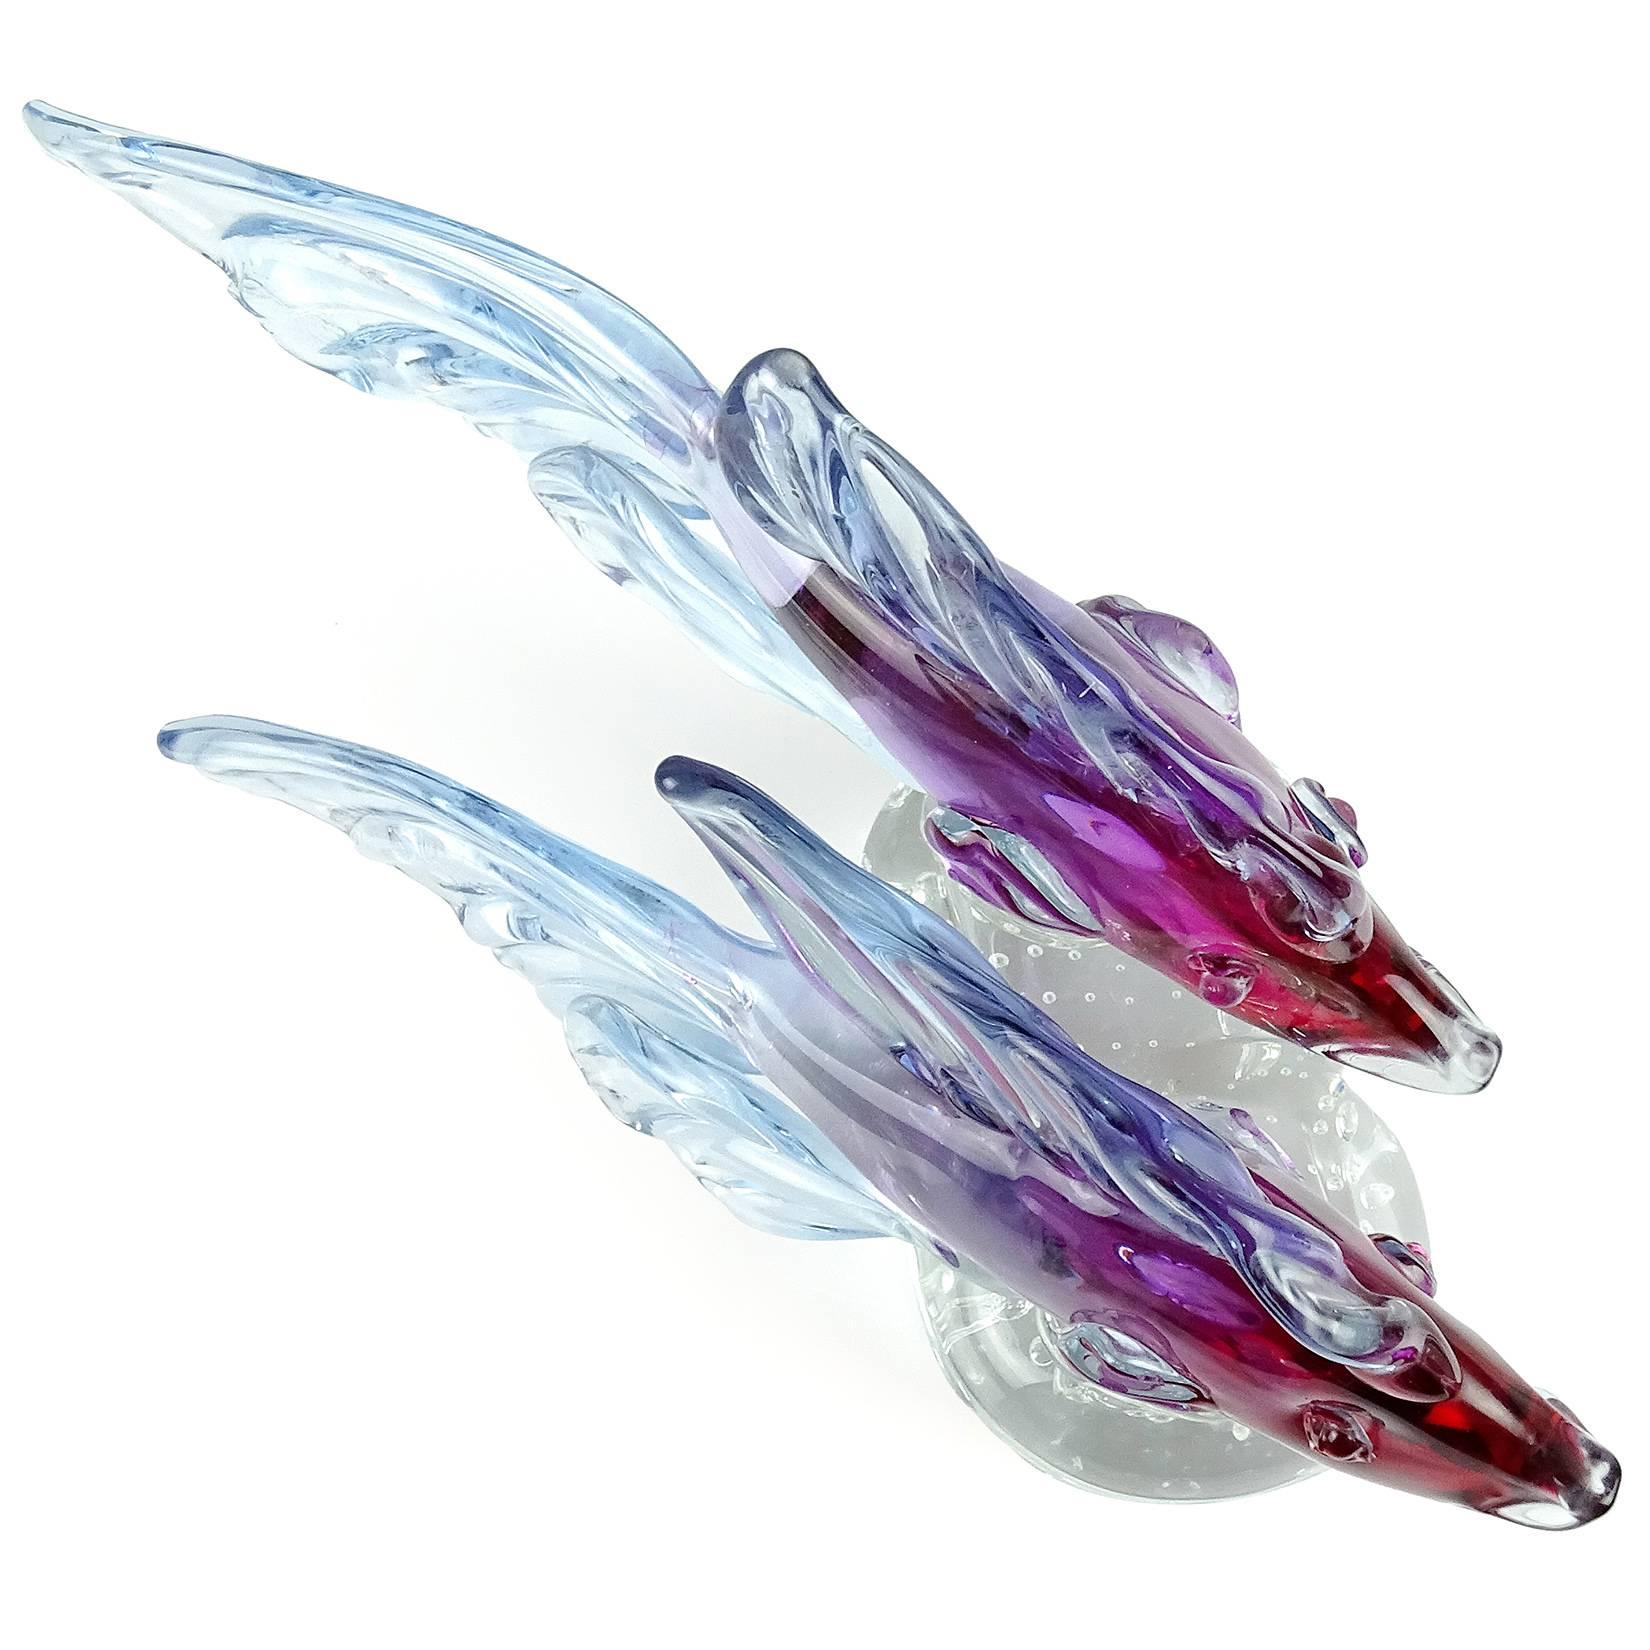 Beautiful Murano hand blown Sommerso red, purple to blue Italian art glass fish sculpture. Documented to designer Alfredo Barbini, circa 1950s. Shown in his catalog for Weil ceramics and glass. The fish bodies are very well detailed. The base has